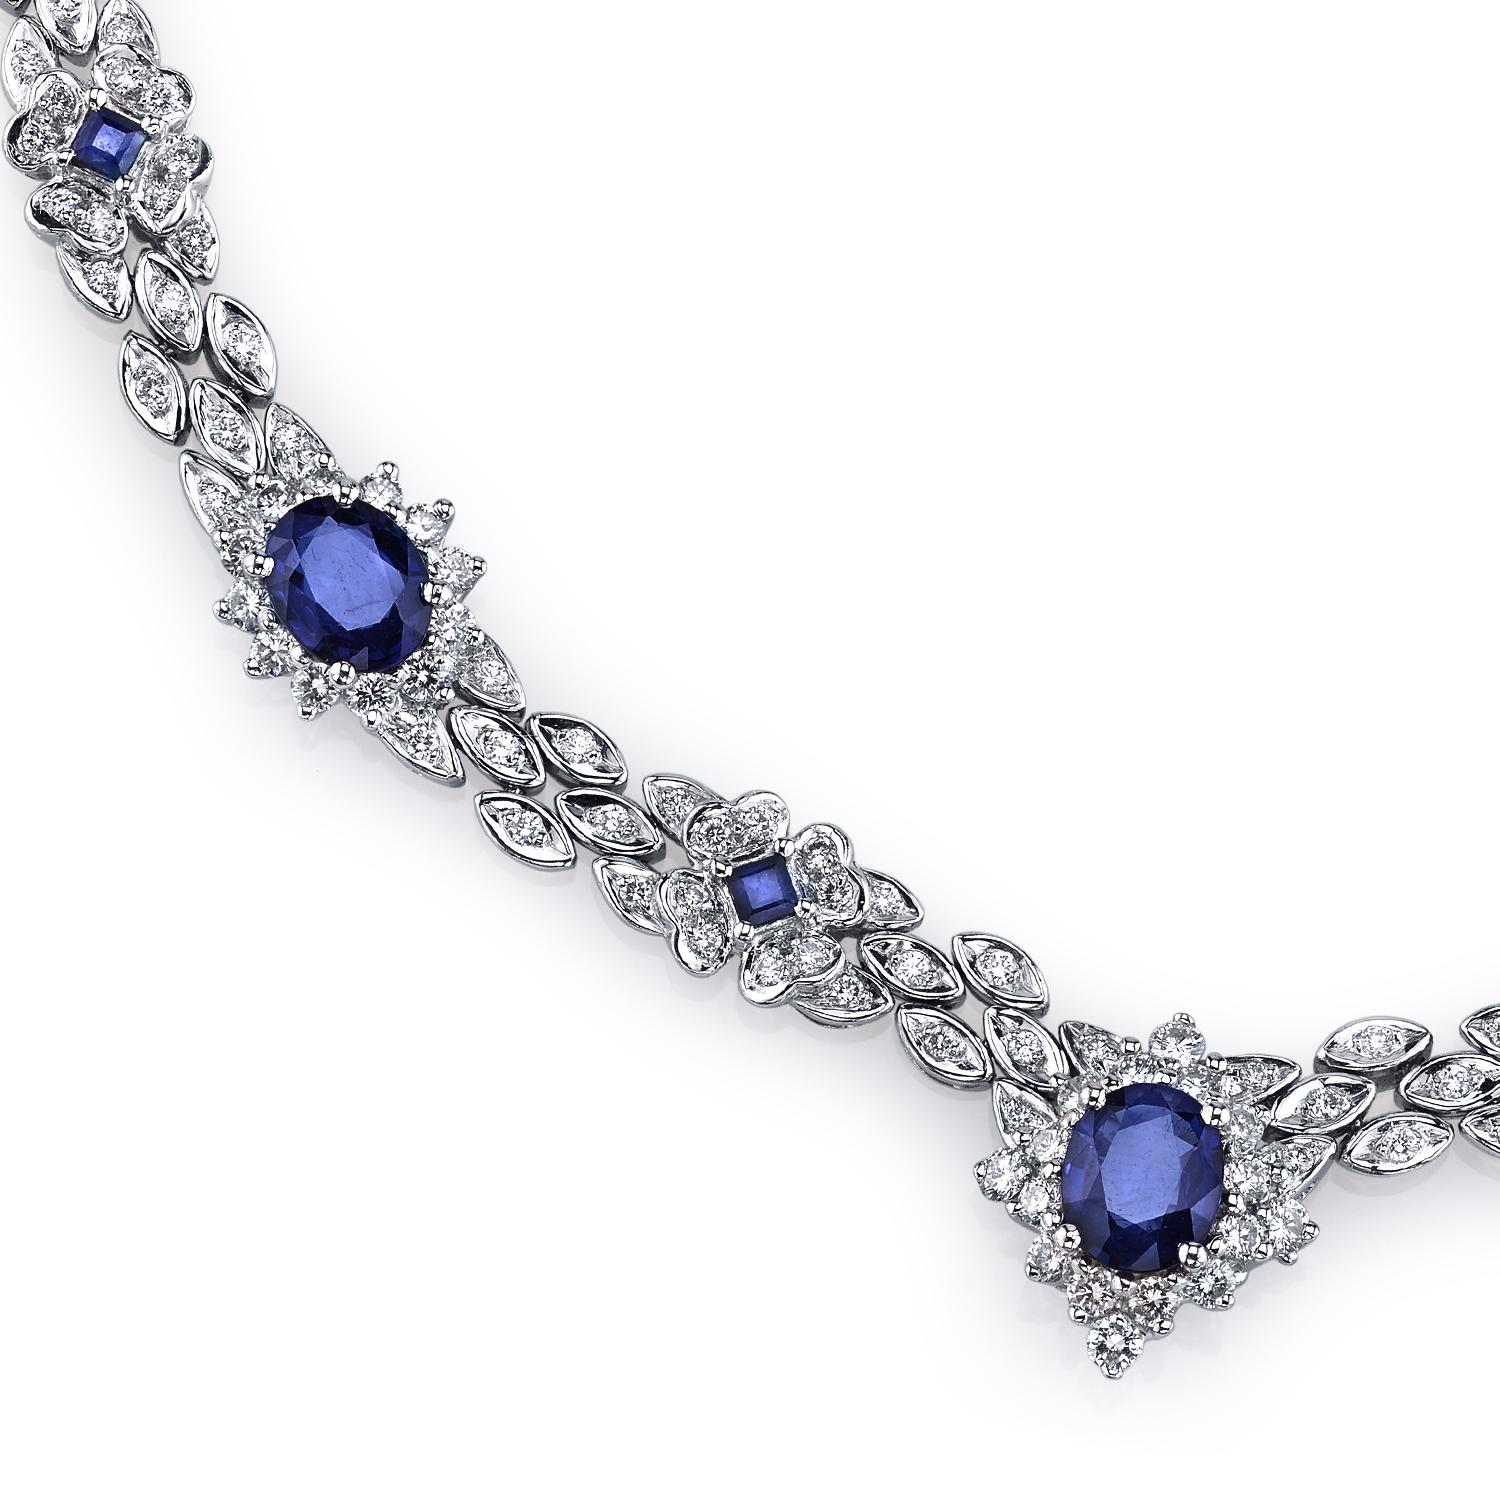 A dazzling necklace featuring 6.48 carats of vivid blue sapphires. The oval and princess cut blue sapphires form flower clusters as they are complemented by 5.86 carats of VS quality full-cut diamonds. Set in platinum.

Necklace Length: 16 1/4